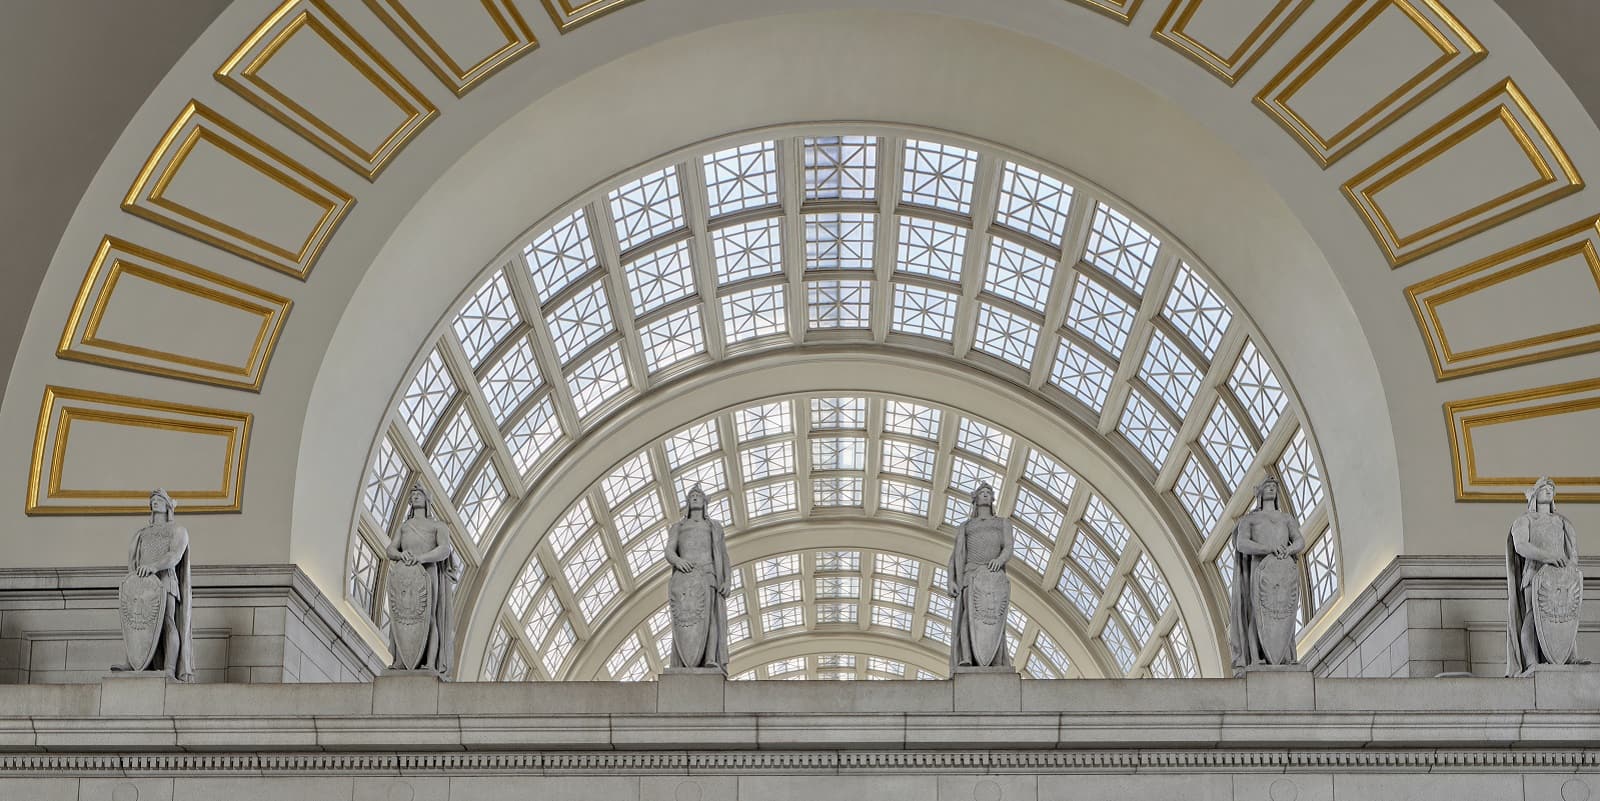 Preserving the Guardians: The Legionnaire Statues of Union Station